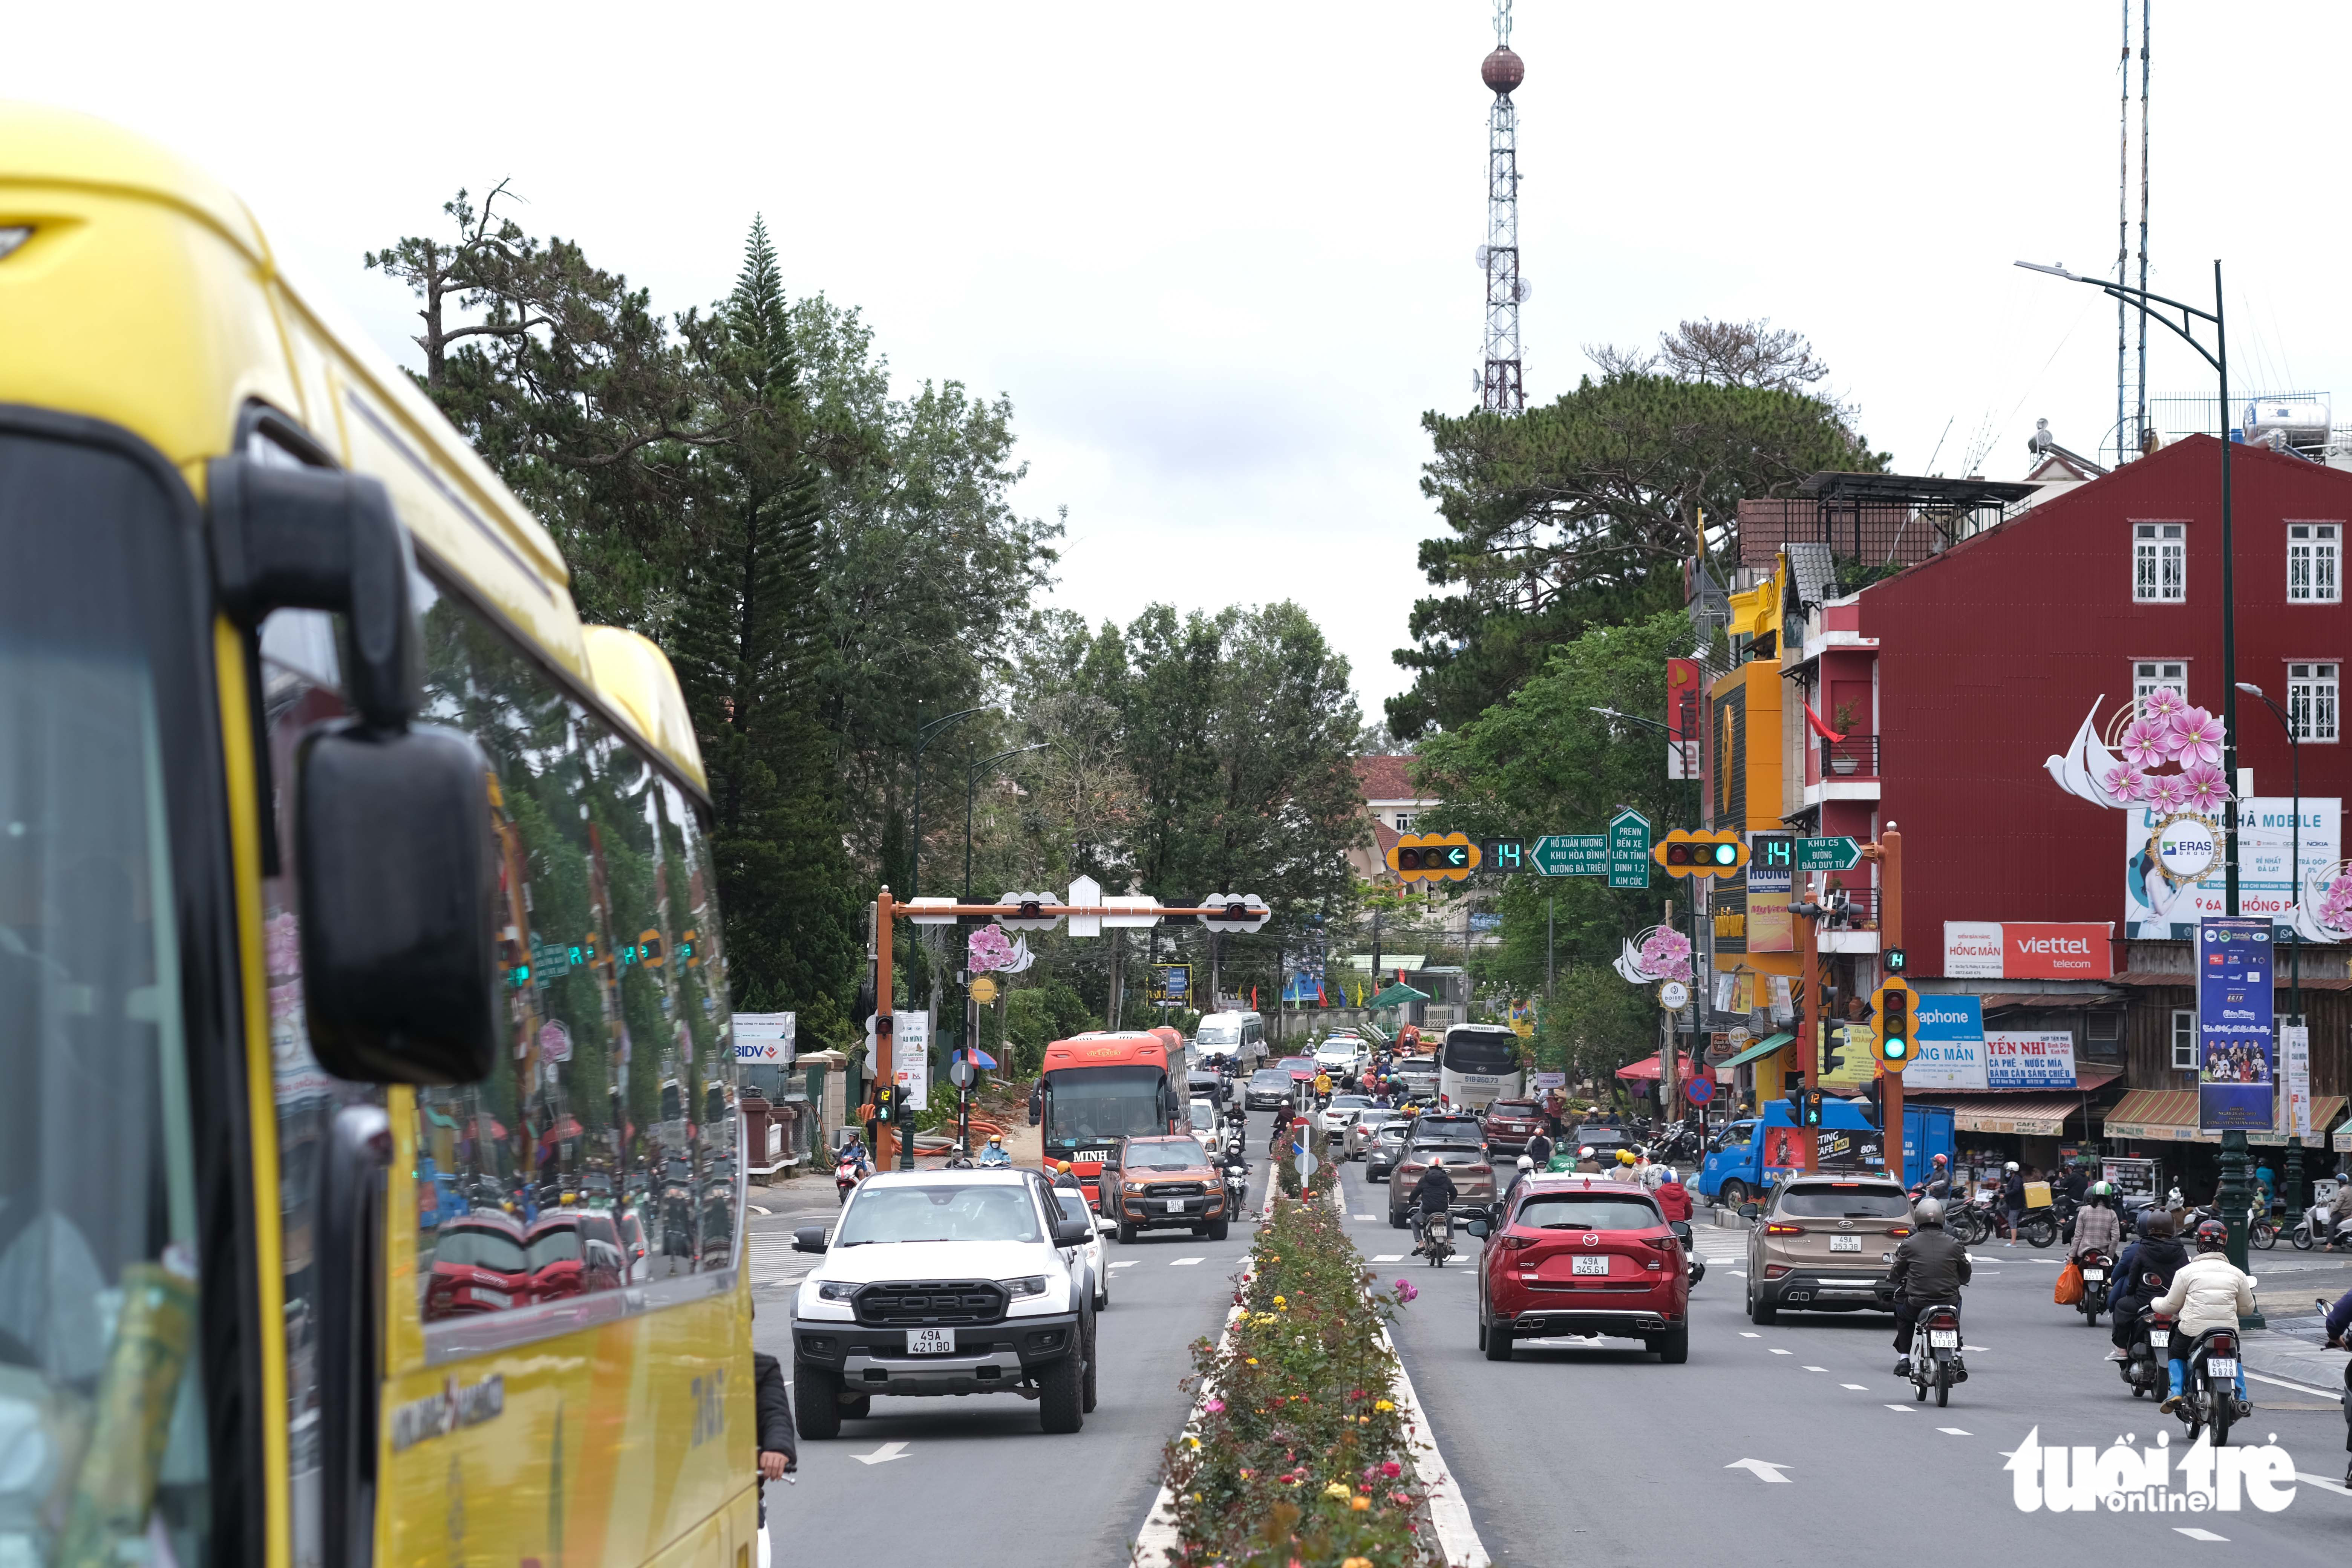 No traffic jam occurs on the usually-busy Tran Phu Street in Da Lat City, Lam Dong Province during the four-day break marking Reunification Day (April 30) and International Workers’ Day (May 1) in 2022. Photo: M. Vinh / Tuoi Tre